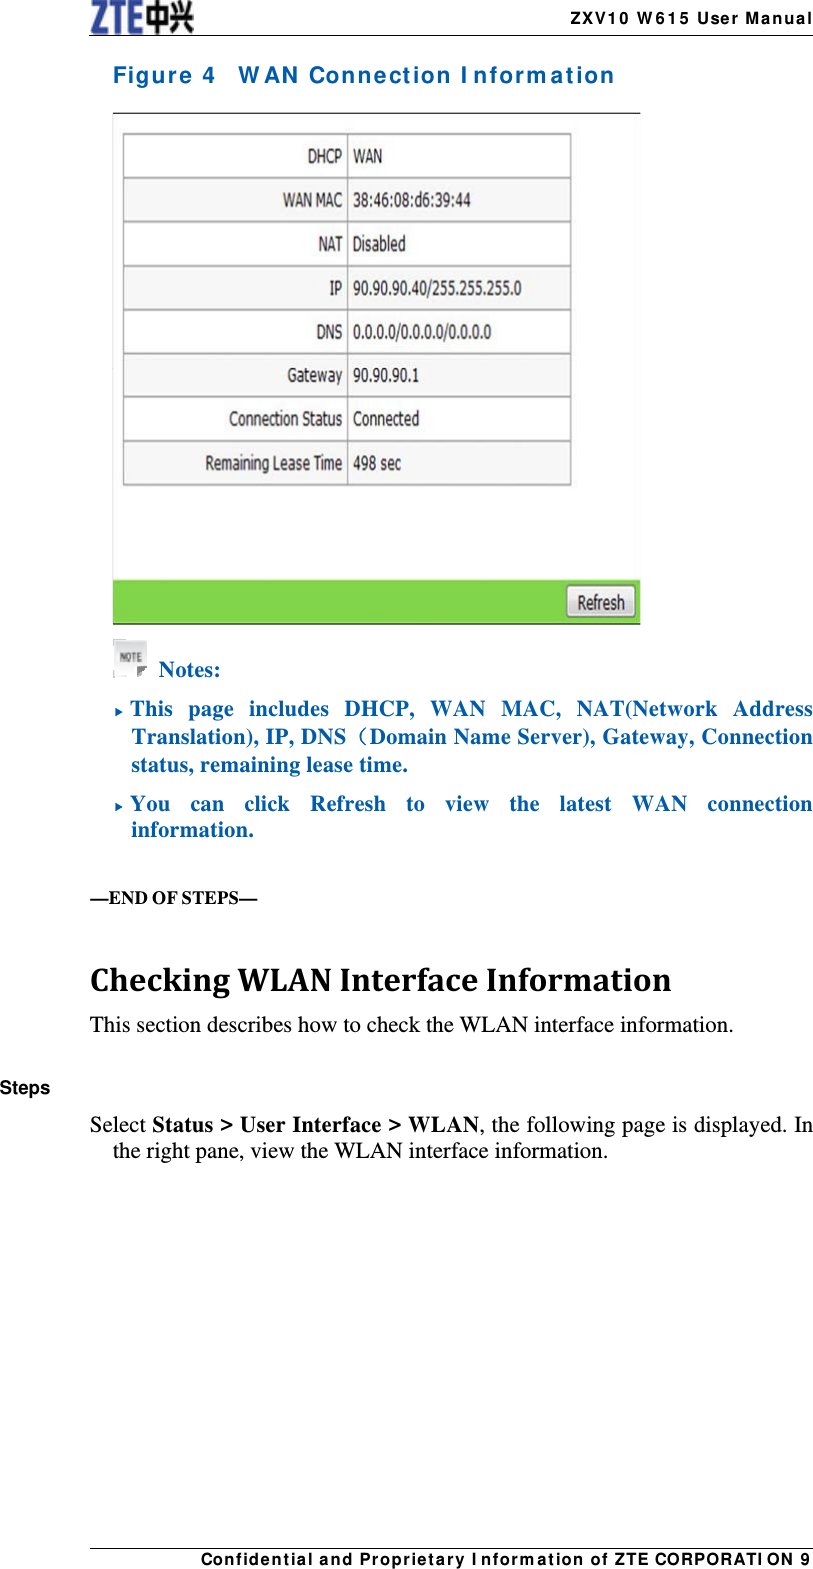    ZX V1 0  W 6 1 5  User Manua lCon fidentia l and Proprieta r y I nform a t ion of ZTE CORPORATI ON 9 Figure  4    W AN  Connect ion I nform a t ion    Notes:  This page includes DHCP, WAN MAC, NAT(Network Address Translation), IP, DNS（Domain Name Server), Gateway, Connection status, remaining lease time.  You can click Refresh to view the latest WAN connection information.    —END OF STEPS—  CheckingWLANInterfaceInformationThis section describes how to check the WLAN interface information.  Steps Select Status &gt; User Interface &gt; WLAN, the following page is displayed. In the right pane, view the WLAN interface information. 